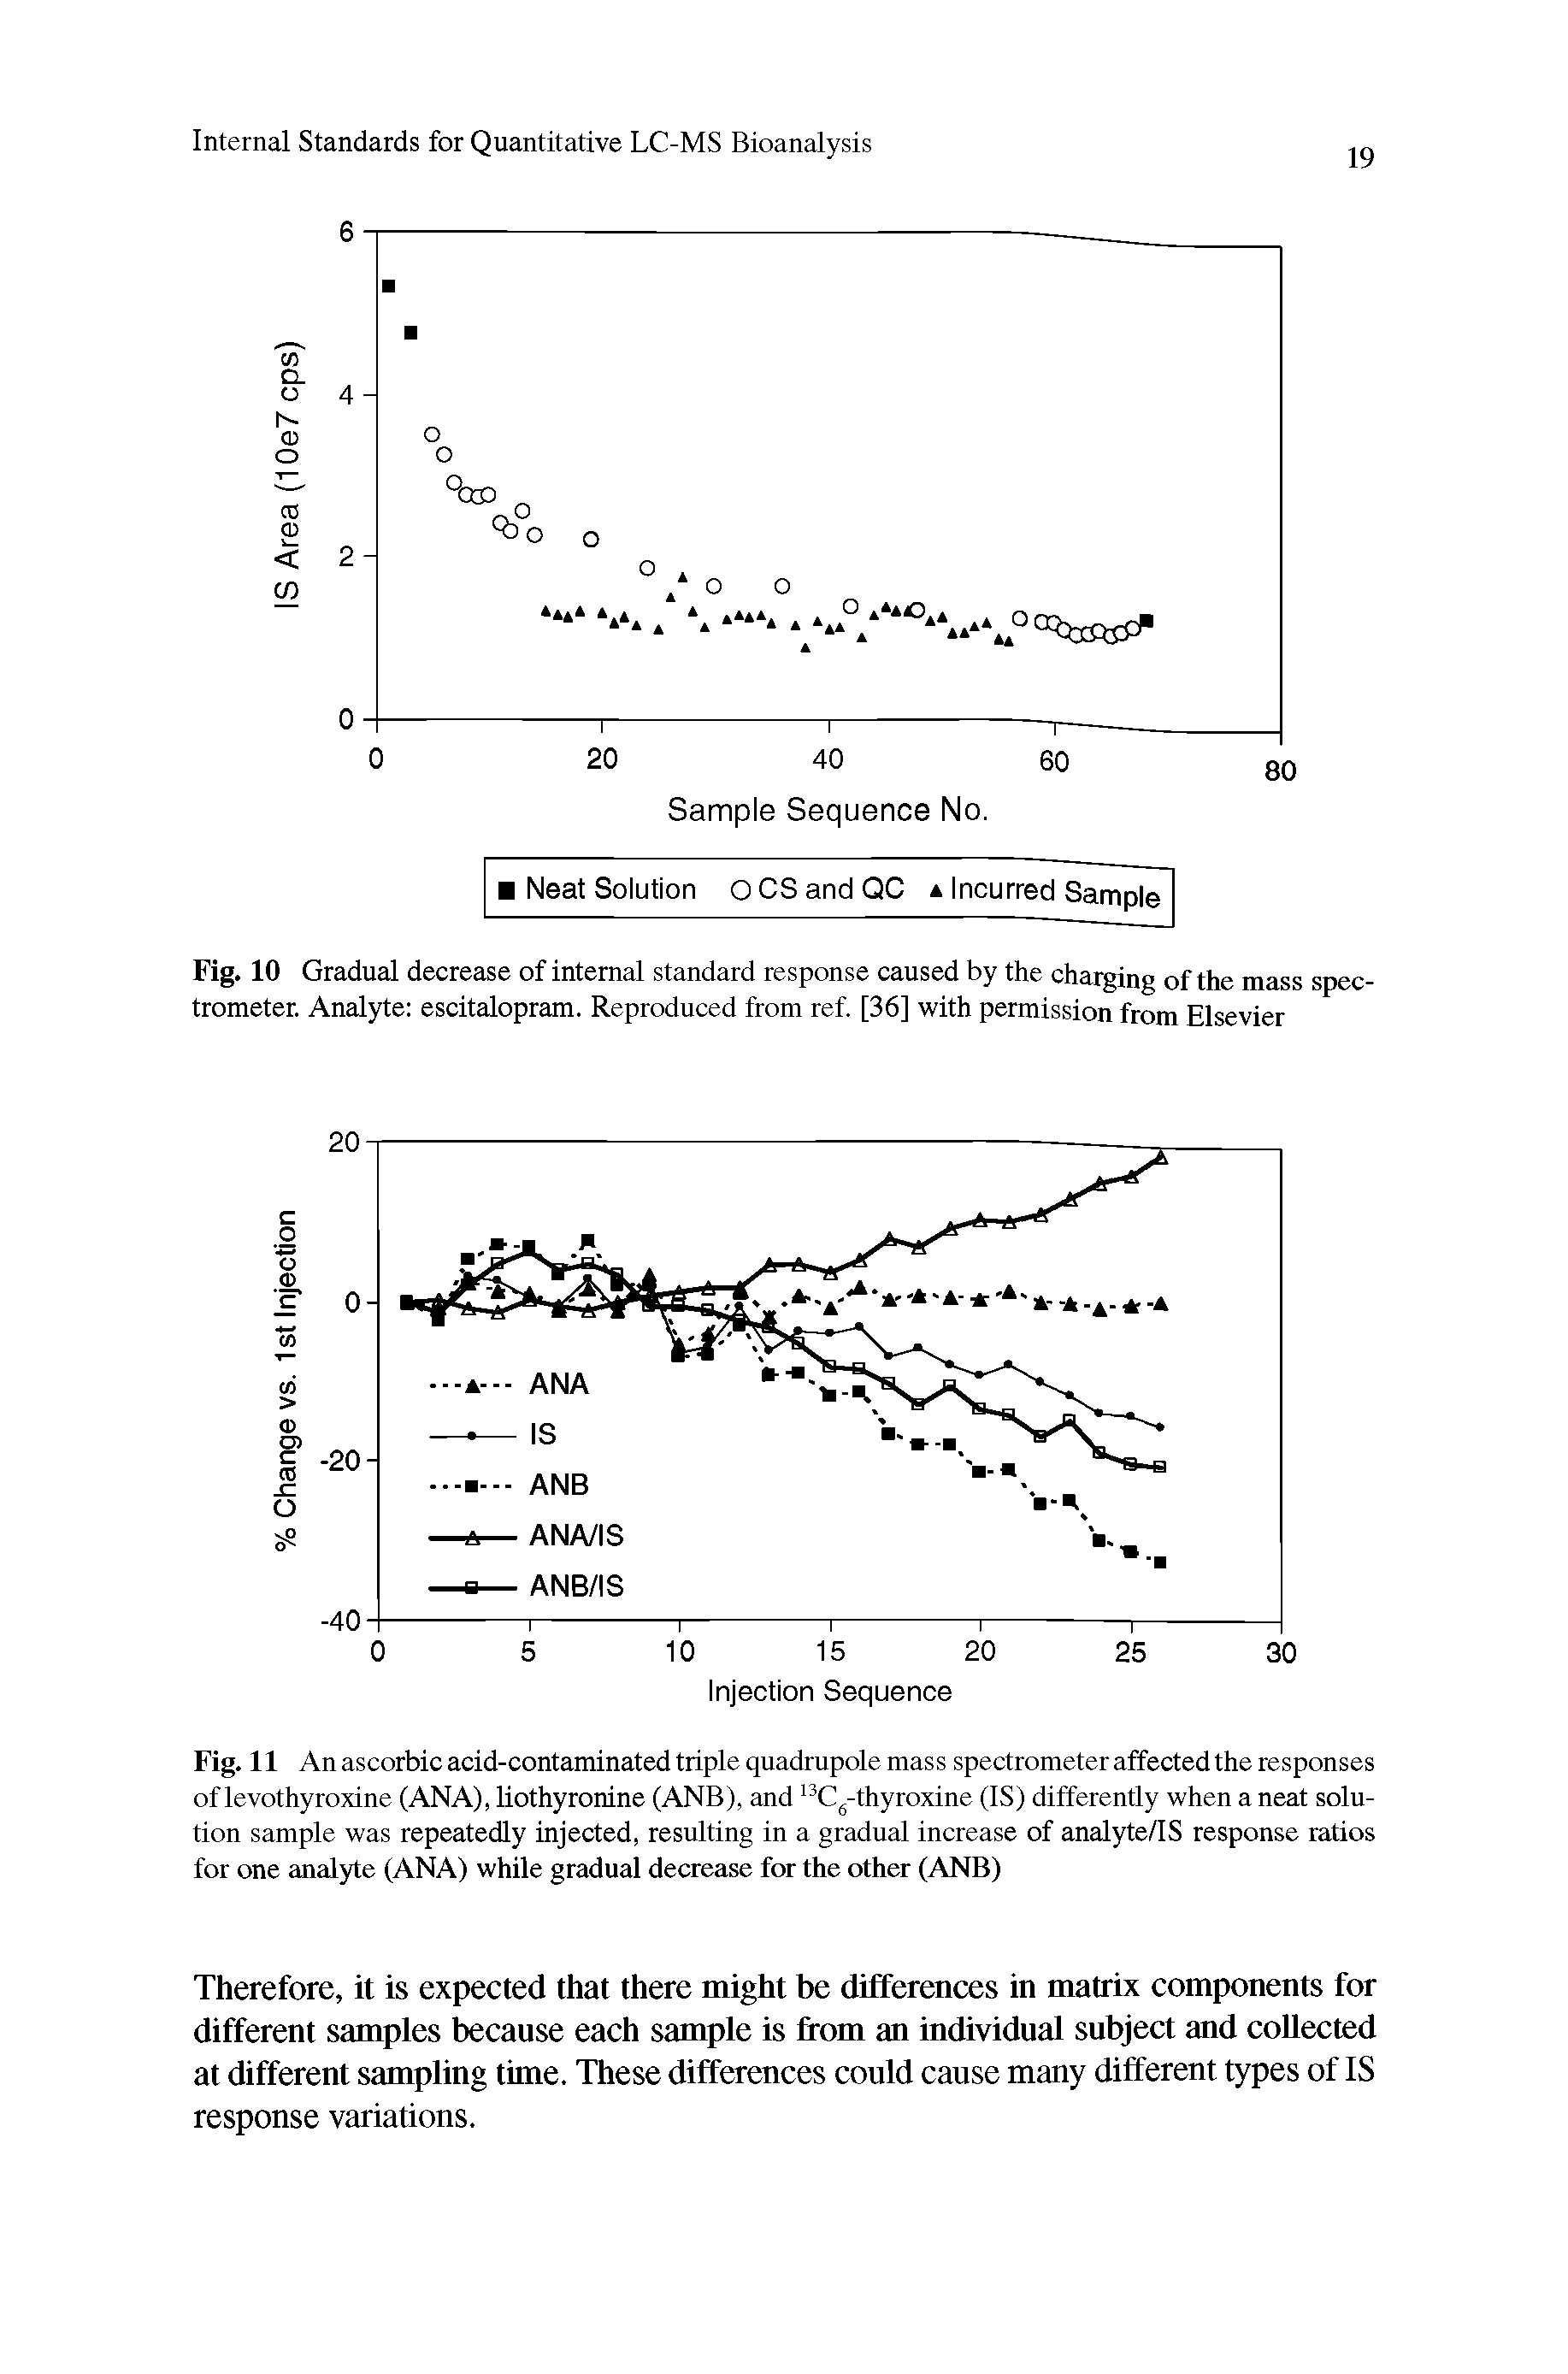 Fig. 11 An ascorbic acid-contaminated triple quadrupole mass spectrometer affected the responses of levothyroxine (ANA), liothyronine (ANB), and 13C6-thyroxine (IS) differently when a neat solution sample was repeatedly injected, resulting in a gradual increase of analyte/IS response ratios for one analyte (ANA) while gradual decrease for the other (ANB)...